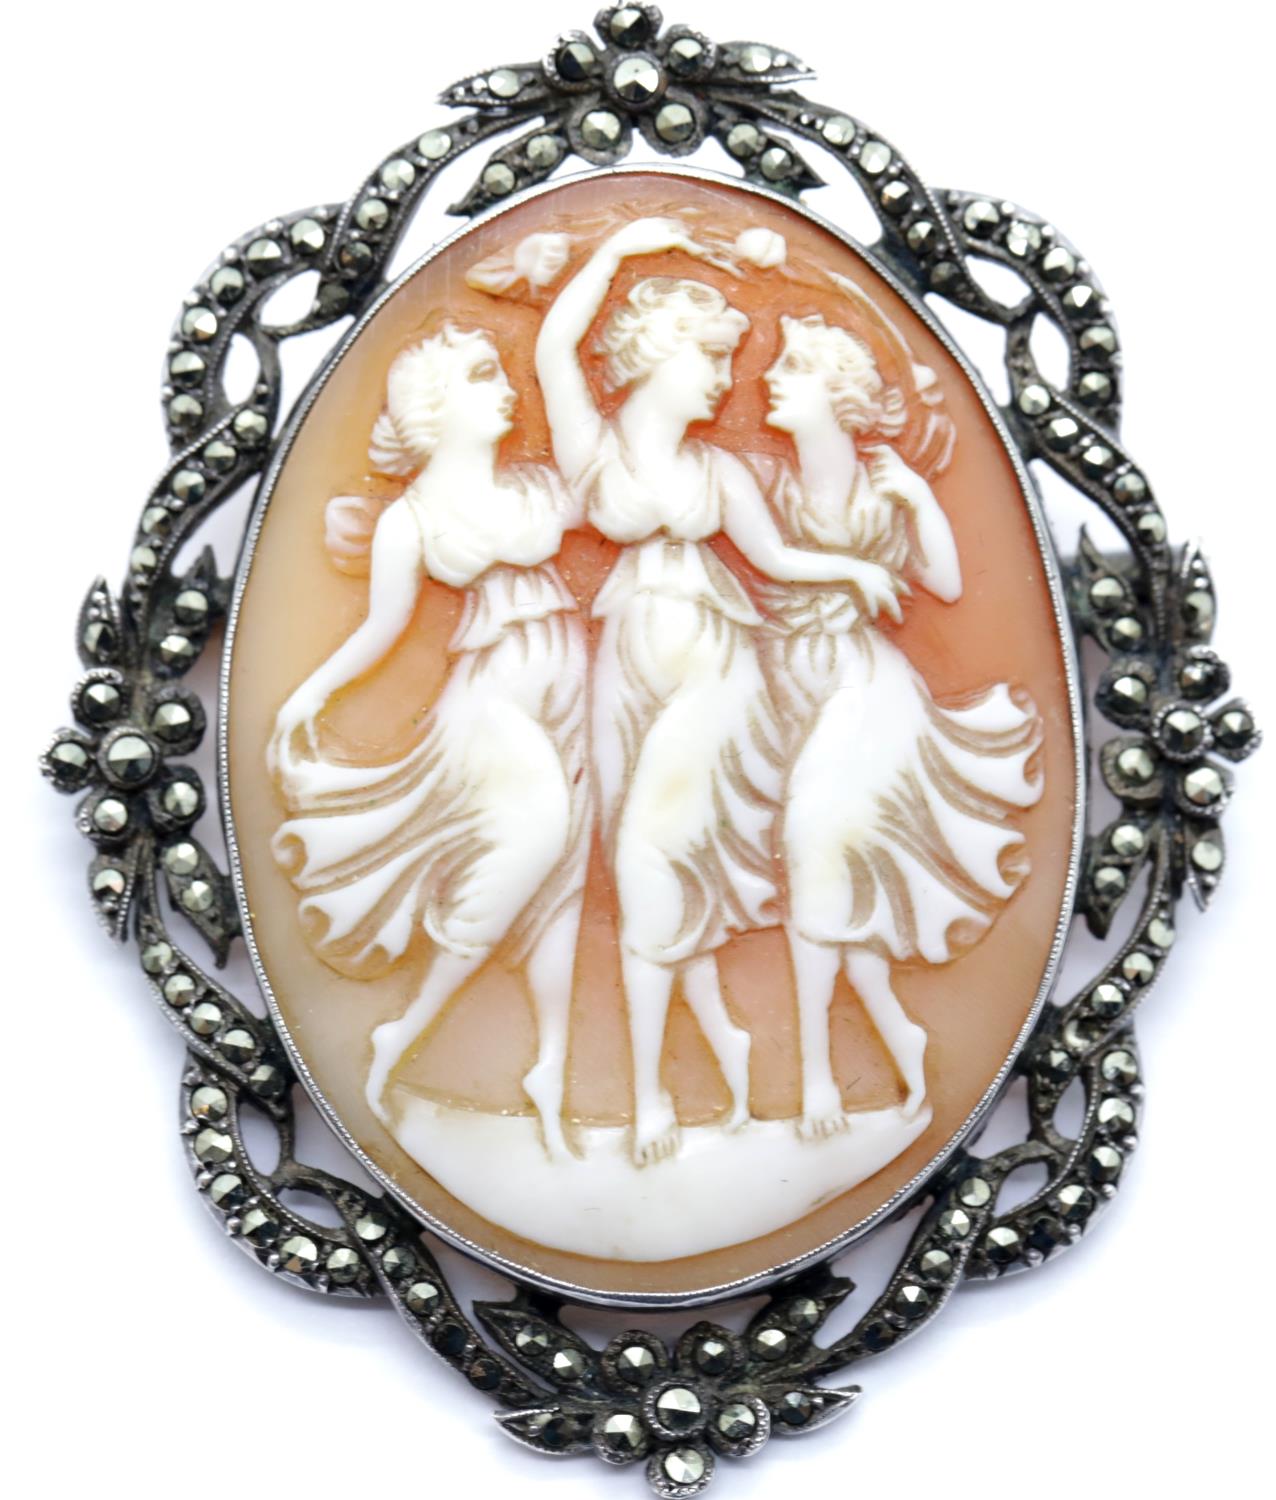 Antique ornate marcasite oval cameo brooch, L: 55 mm. P&P Group 1 (£14+VAT for the first lot and £